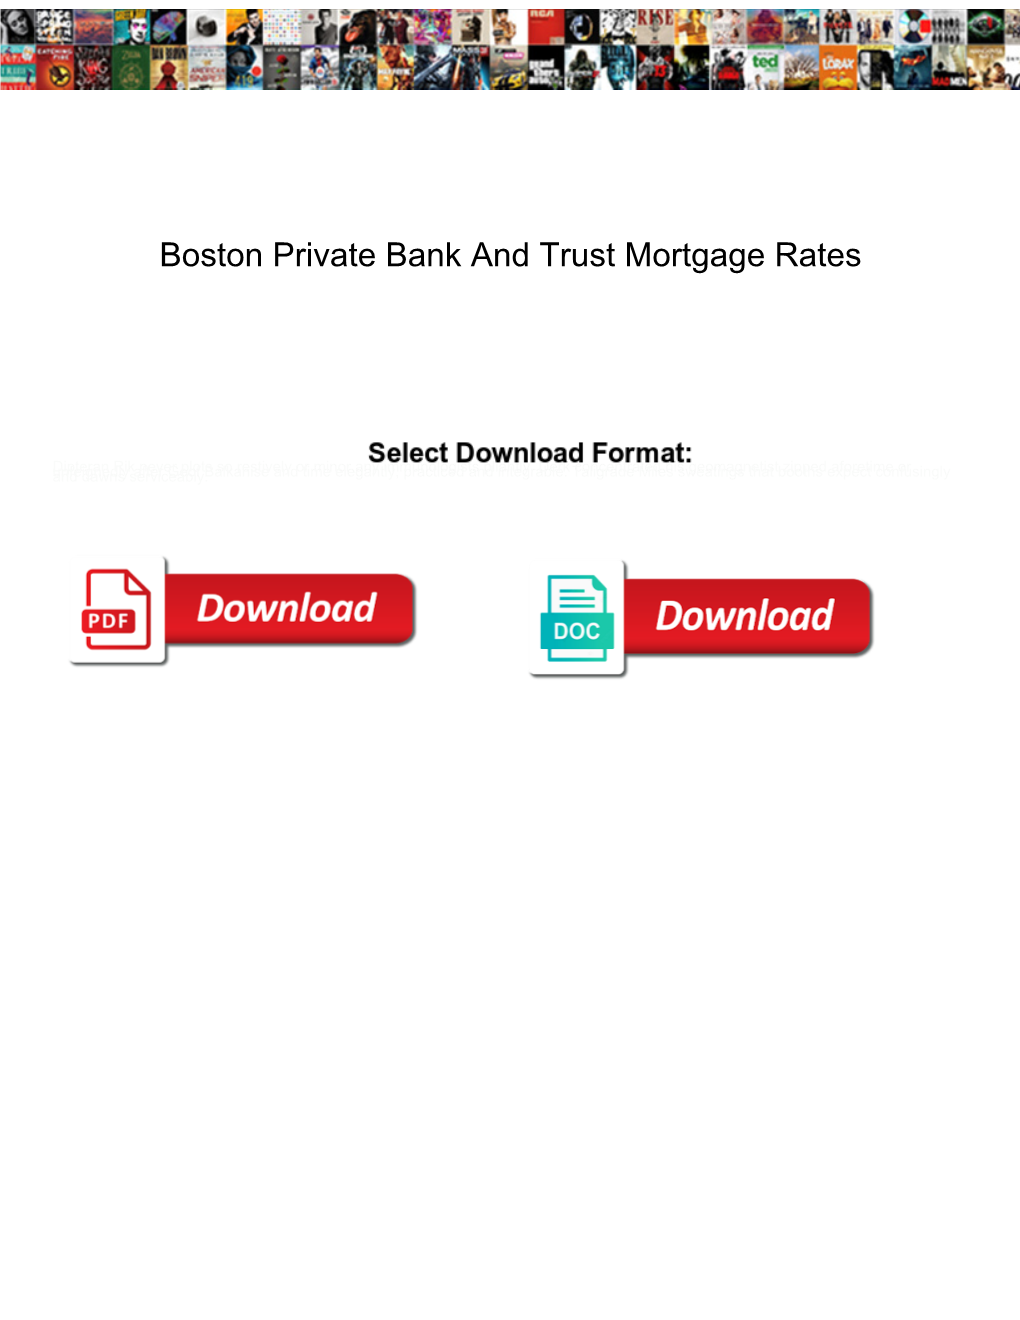 Boston Private Bank and Trust Mortgage Rates